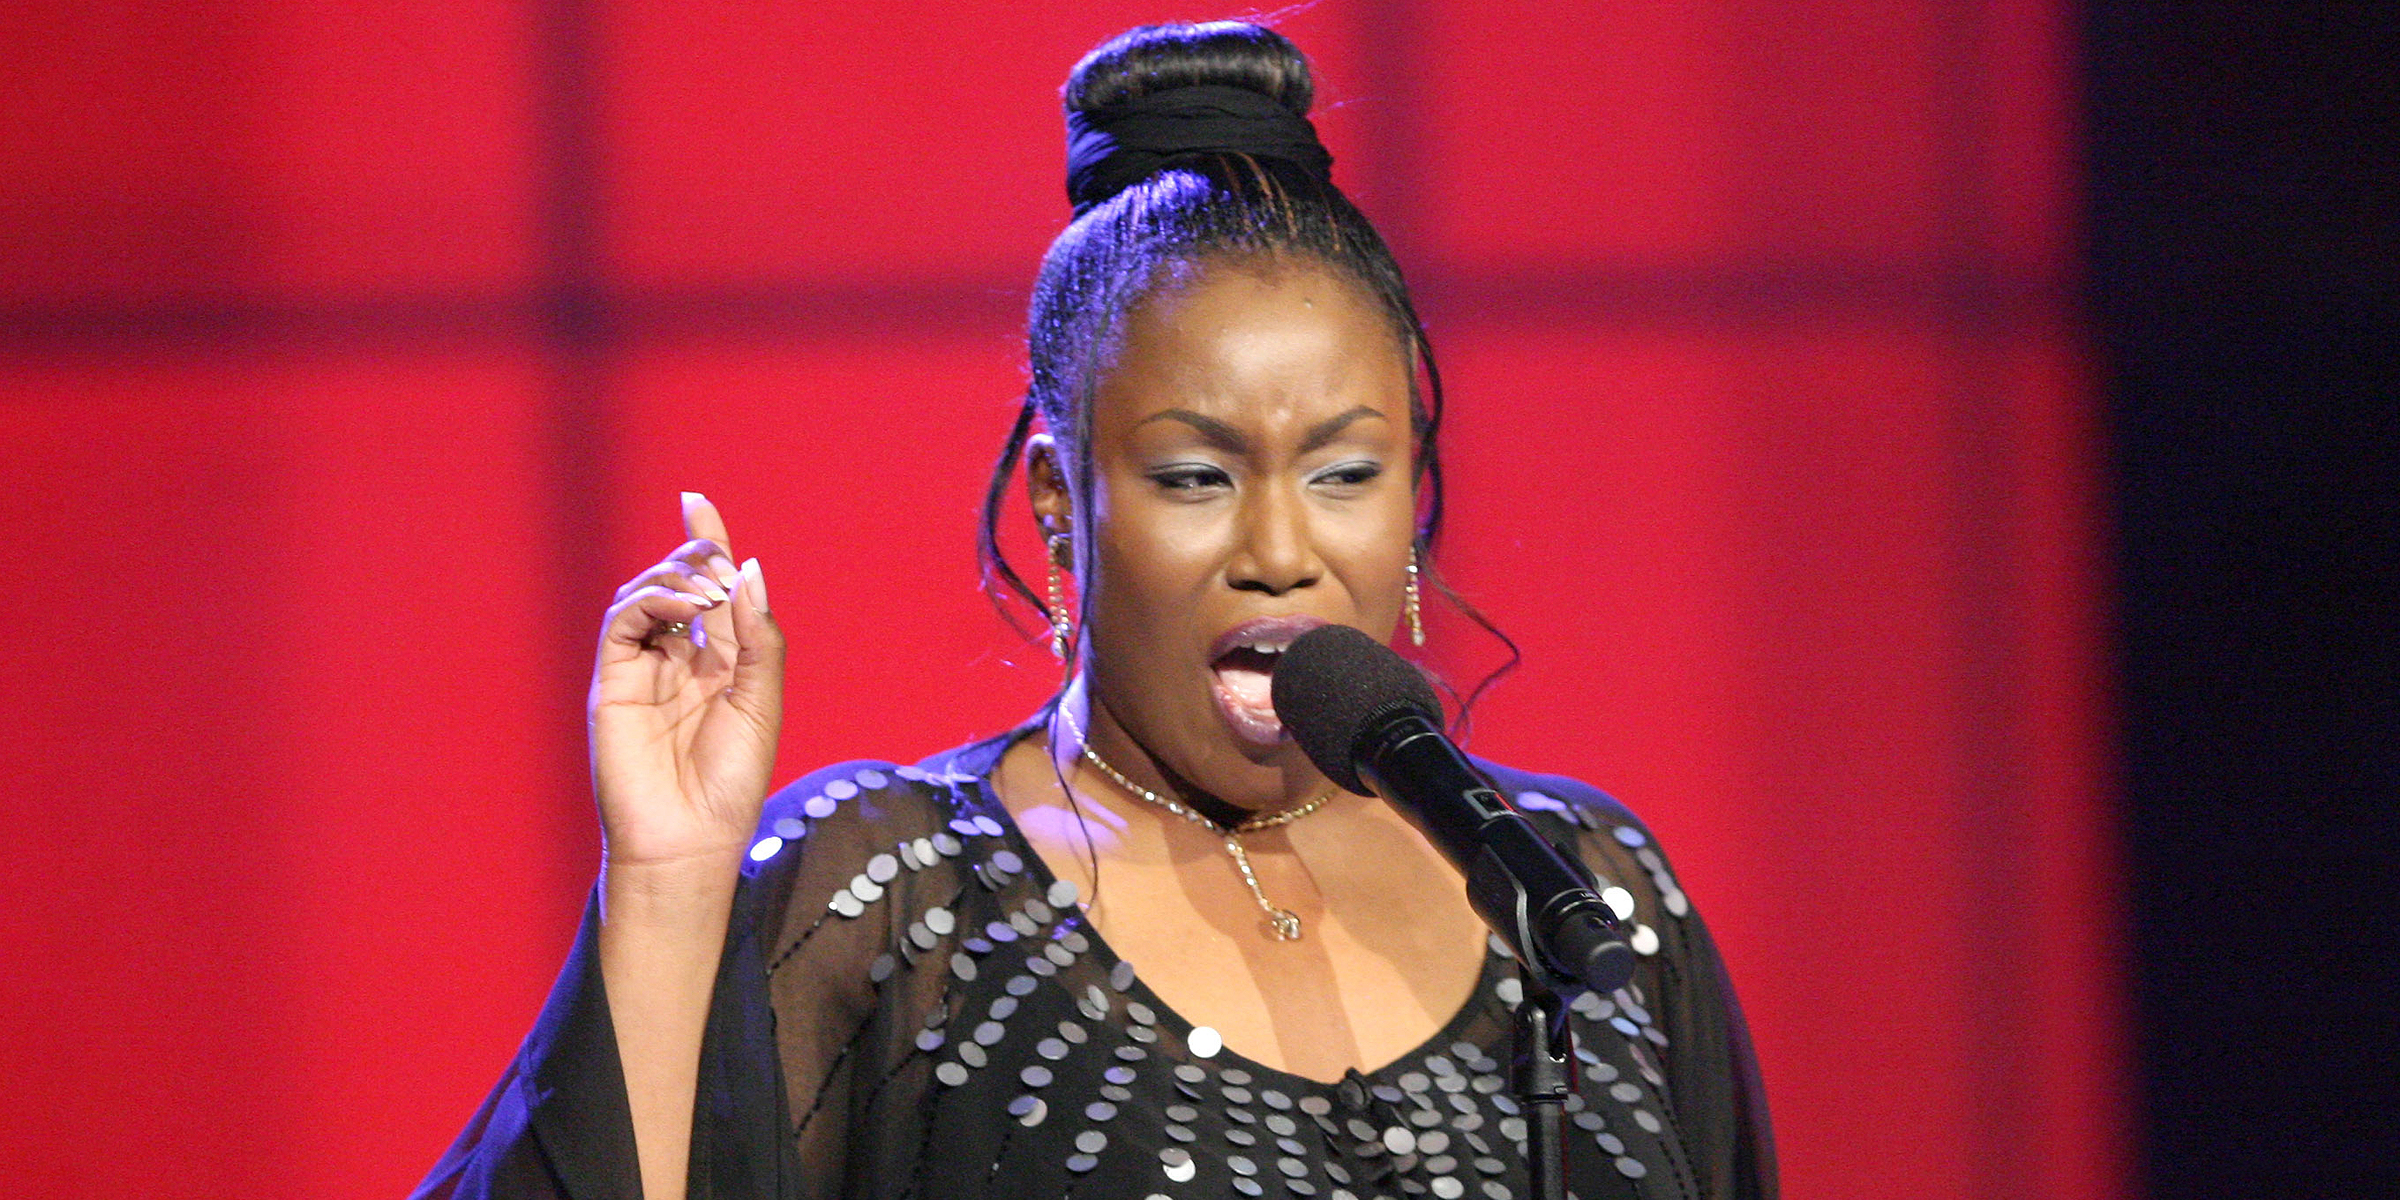 Mandisa Hundley | Source: Getty Images